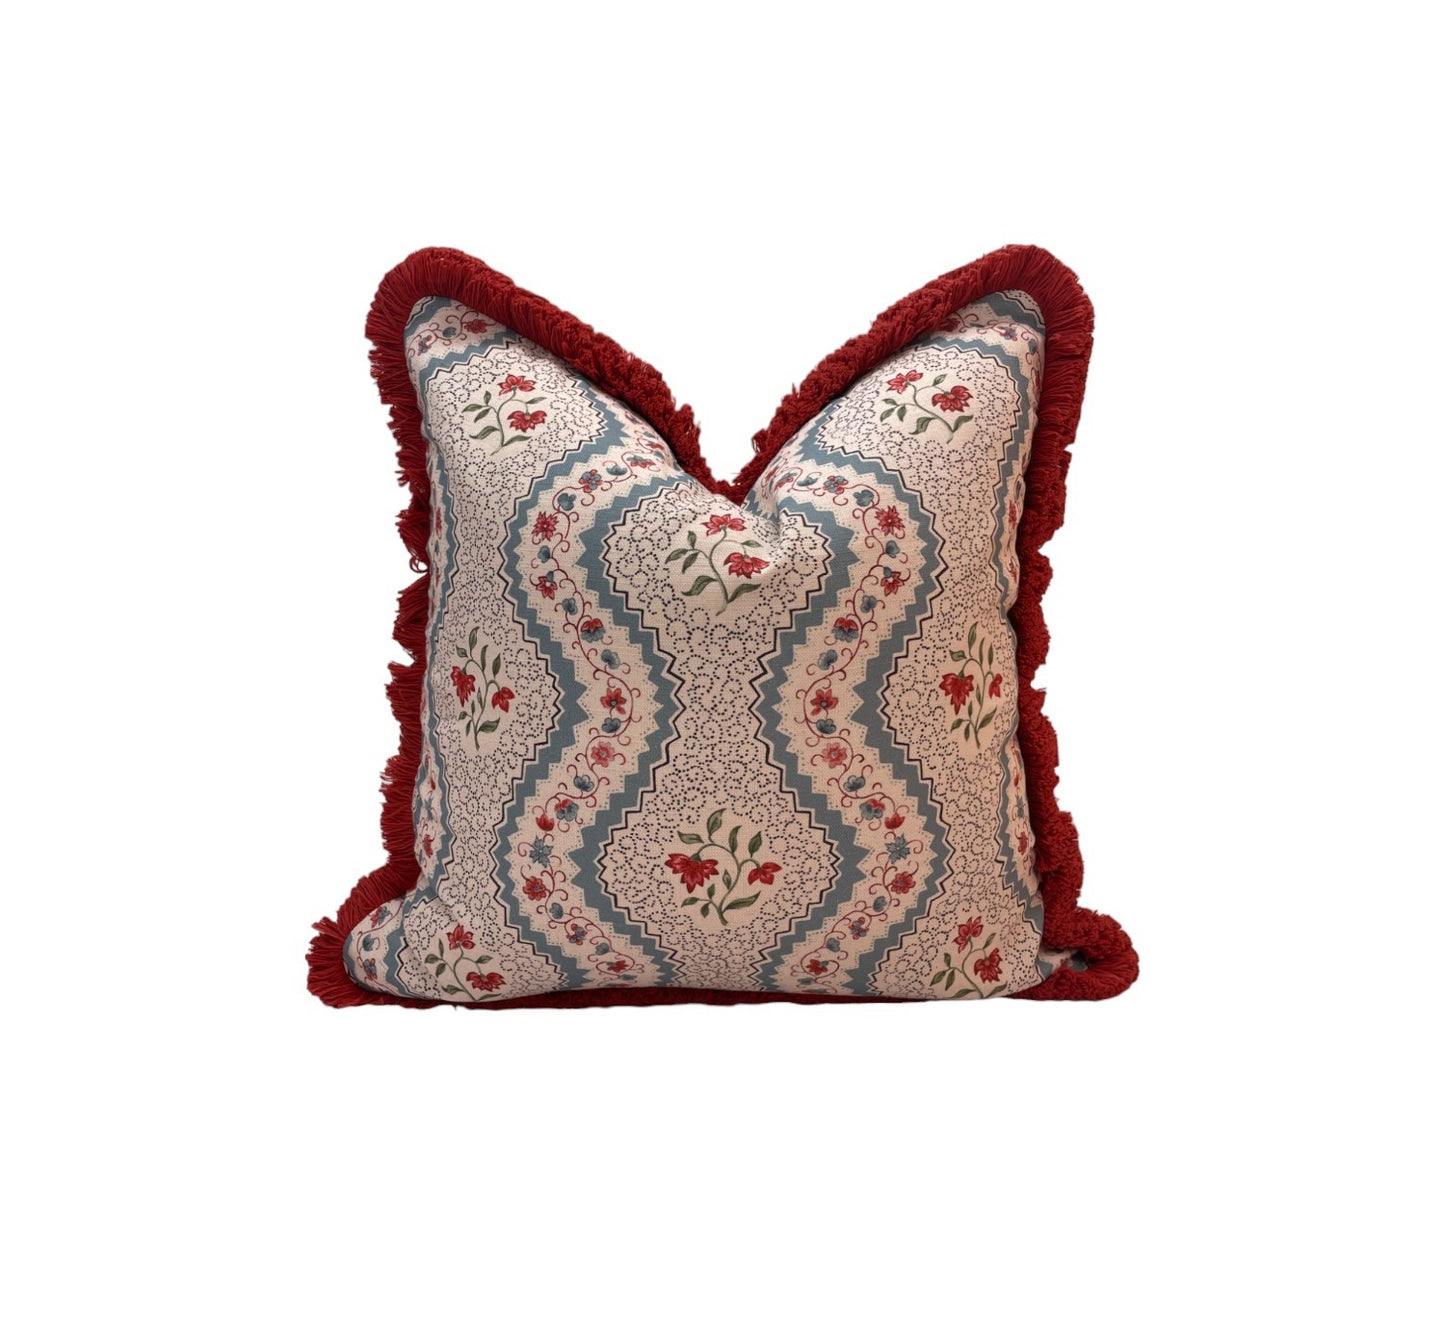 Alison Gee Amelie Blue & Red Cushion